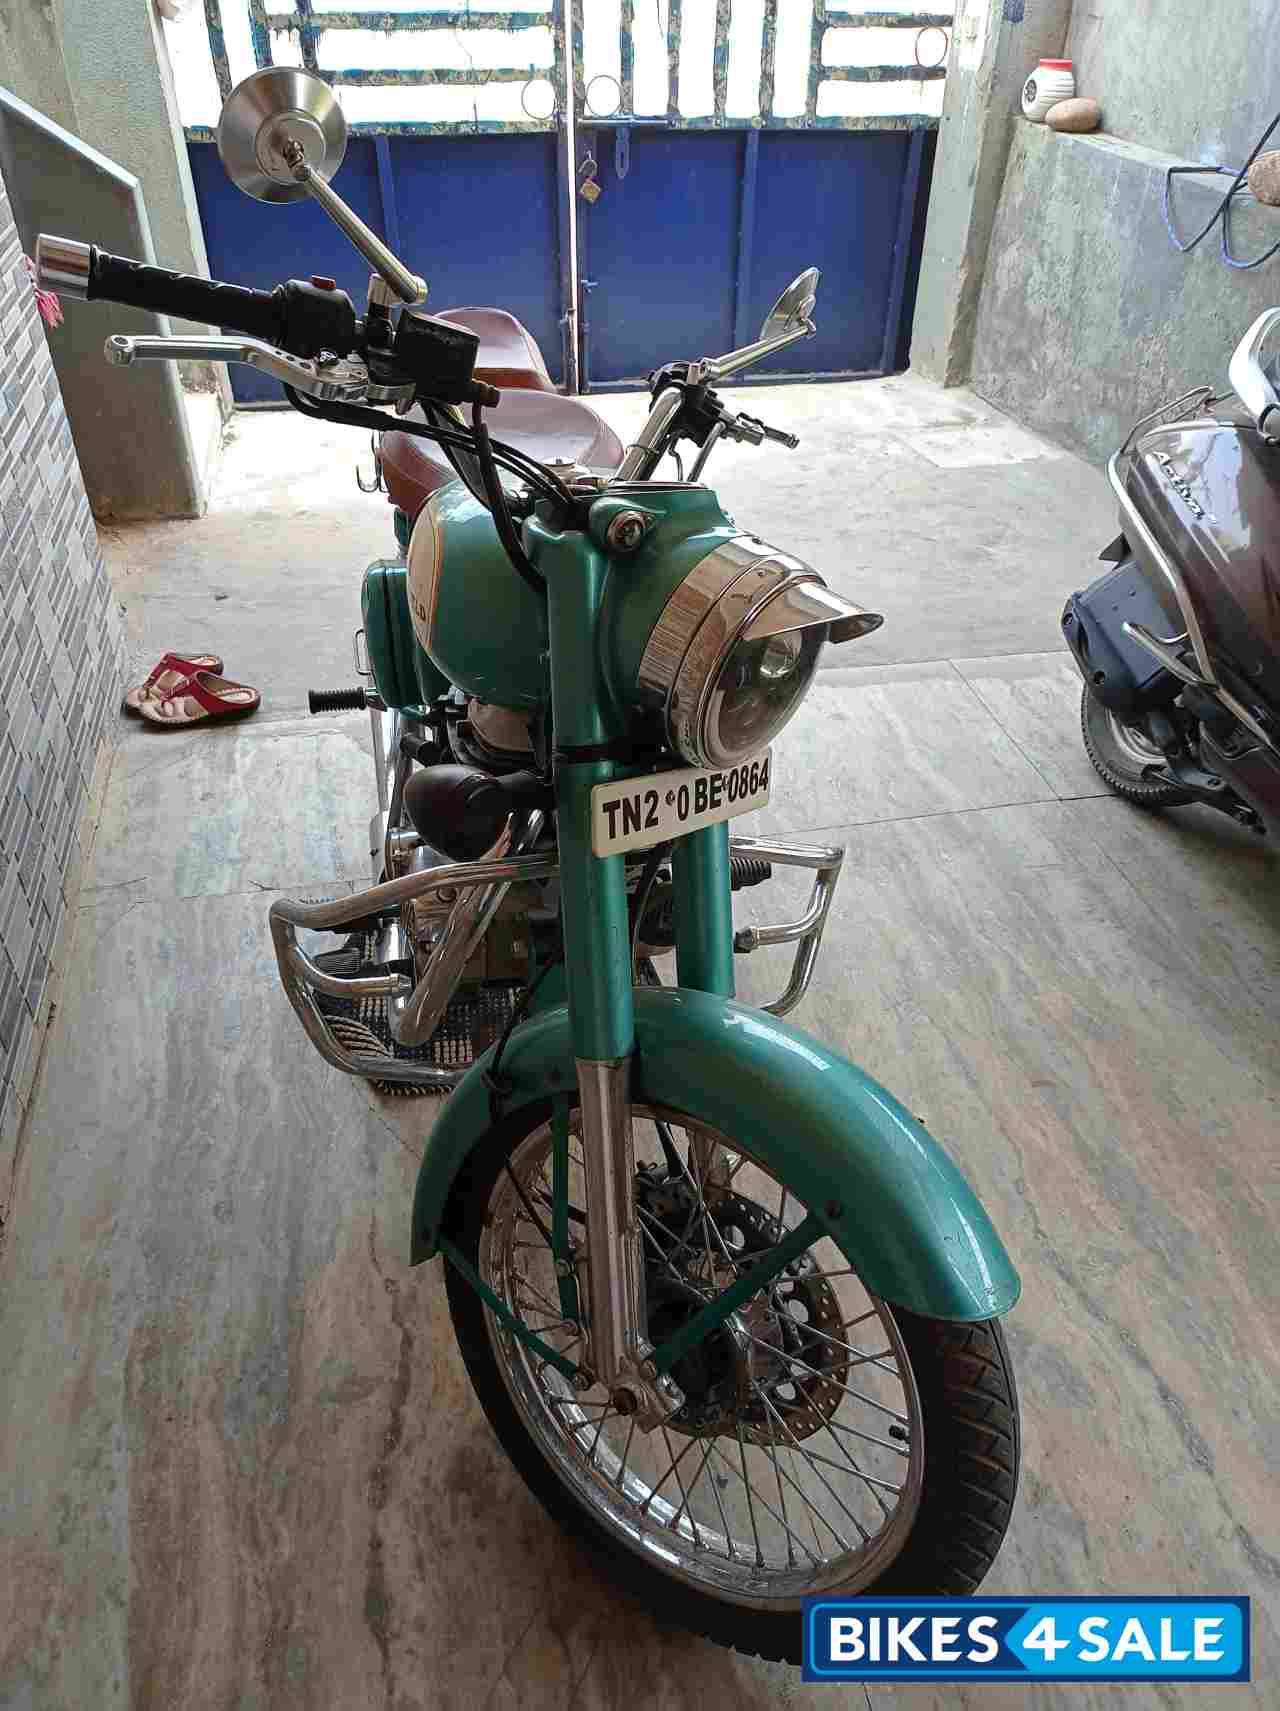 Teal Green Royal Enfield Classic 500